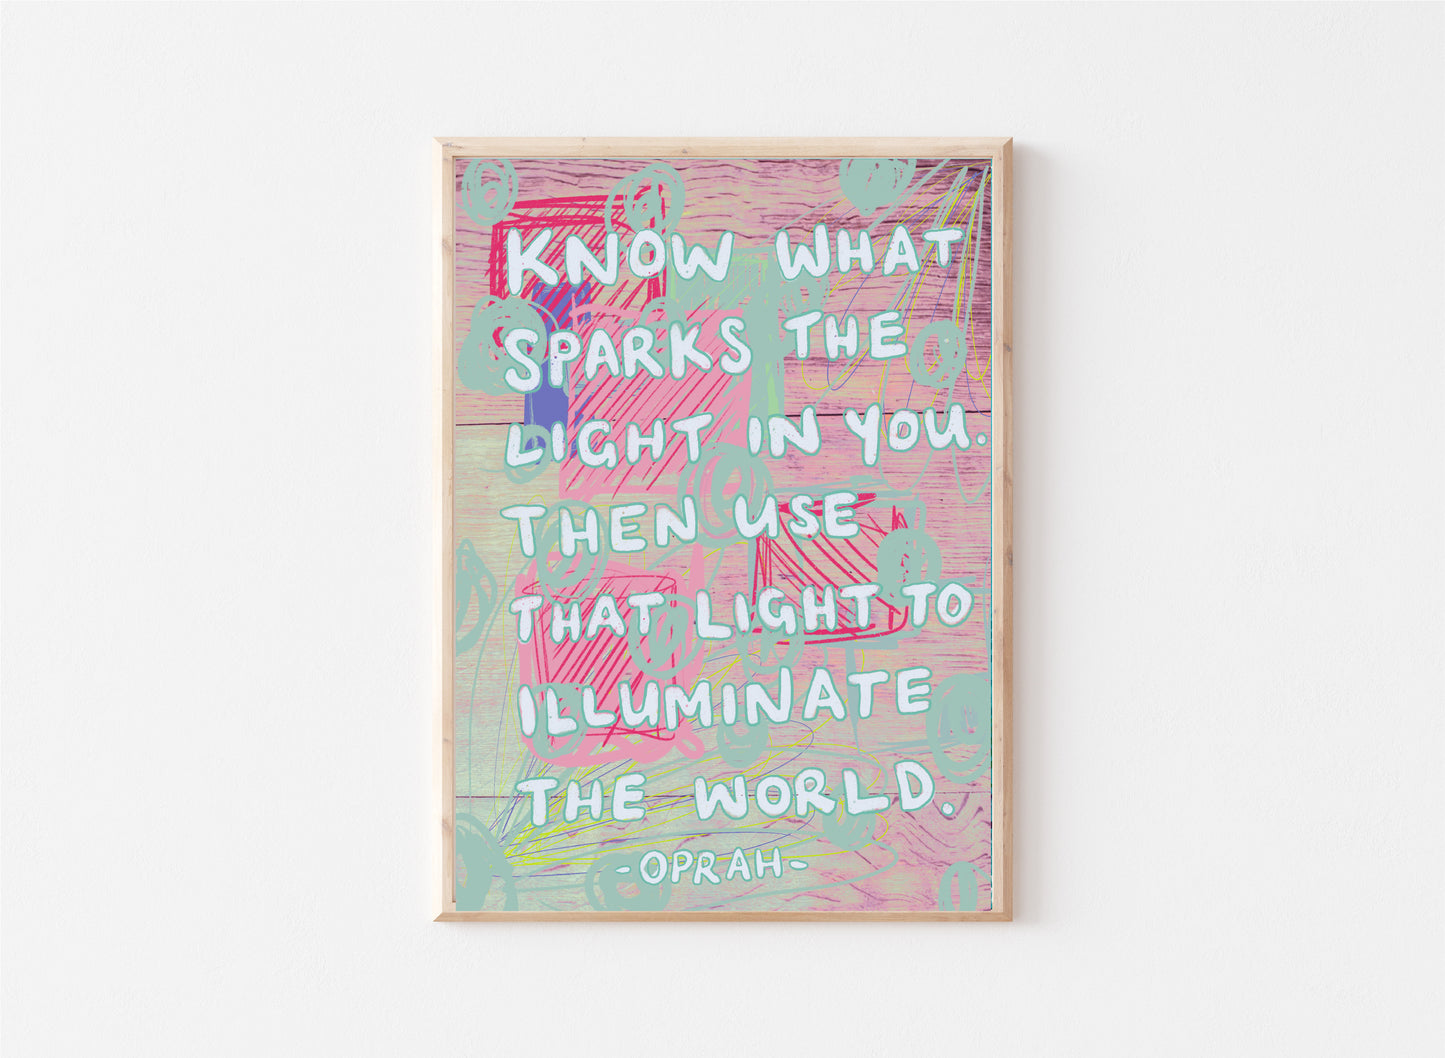 Oprah Winfrey Inspirational quote Art Print / Positive Affirmation / Digital Art Print - Know What Sparks the light in you